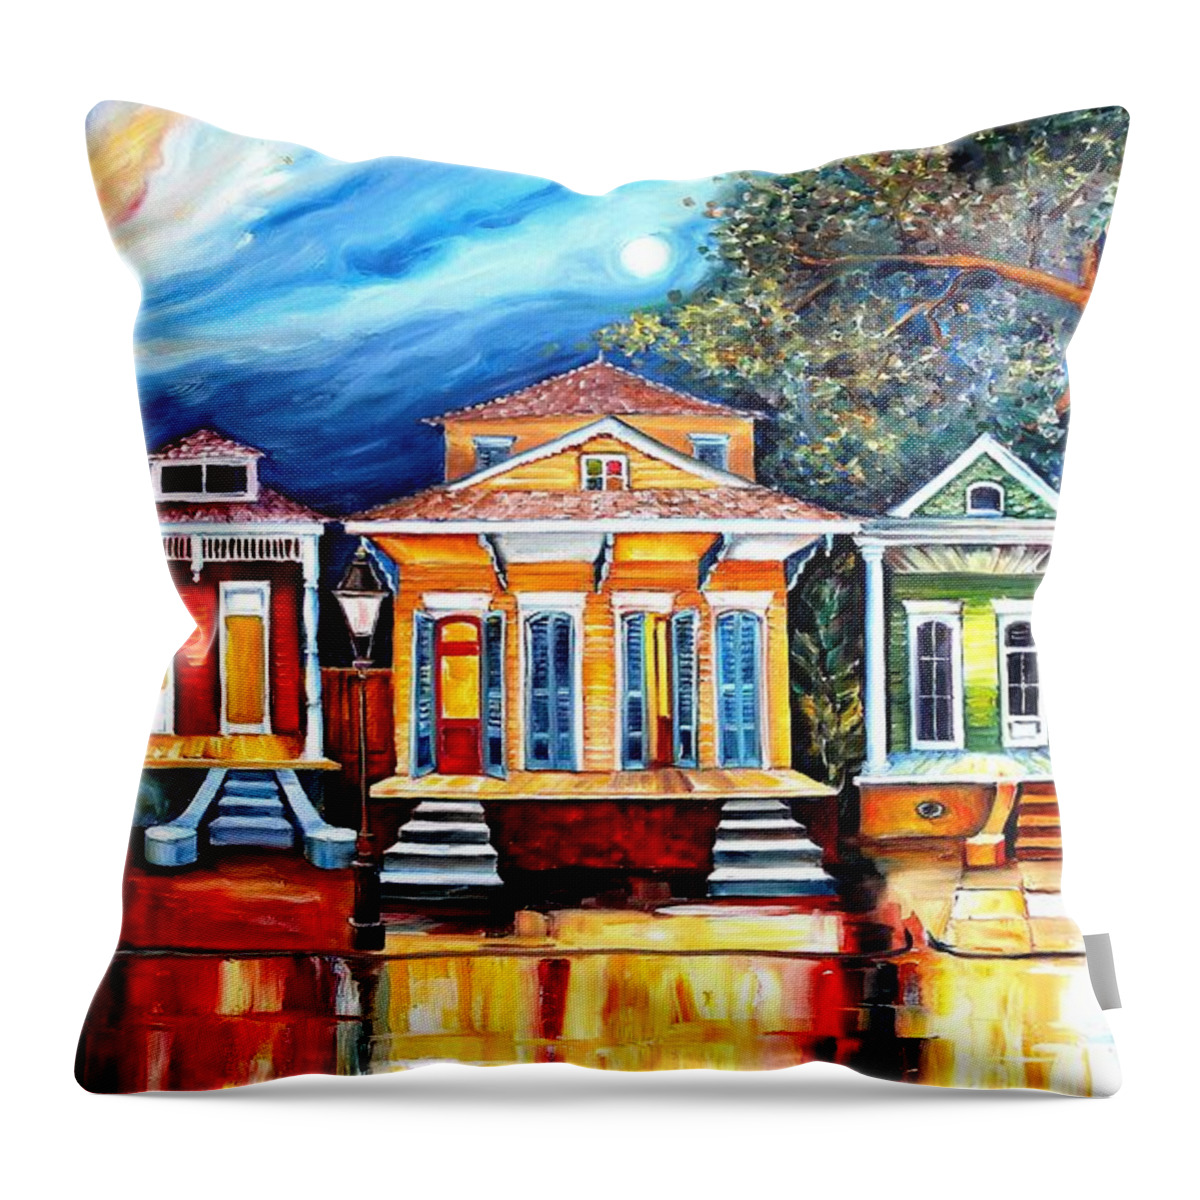 New Orleans Throw Pillow featuring the painting Big Easy Shotguns by Diane Millsap